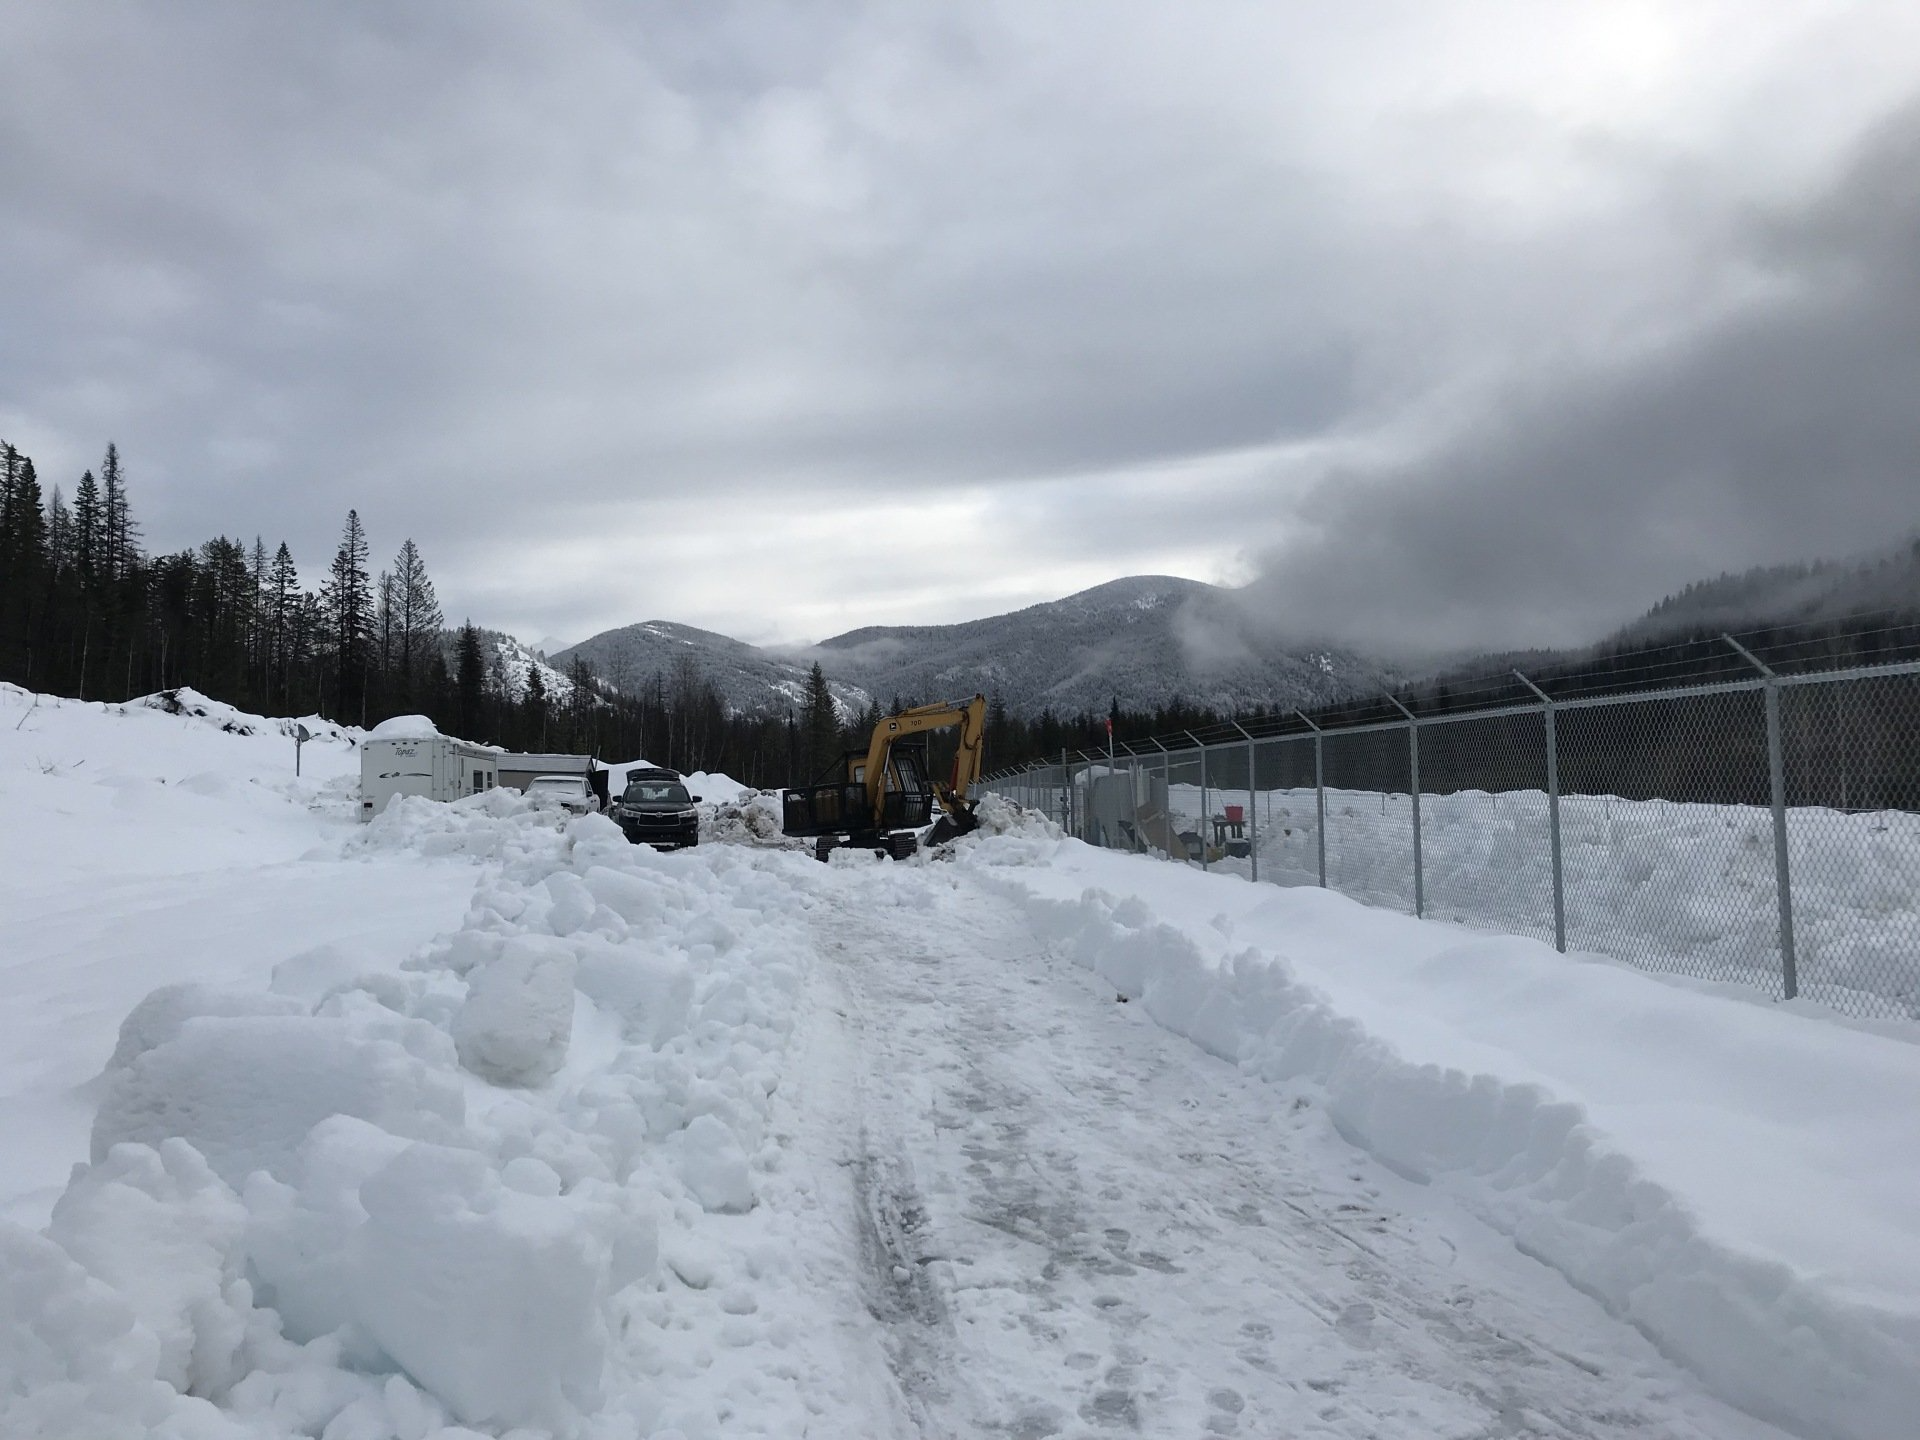 Installing security at an outdoor cannabis grow in British Columbia during the winter